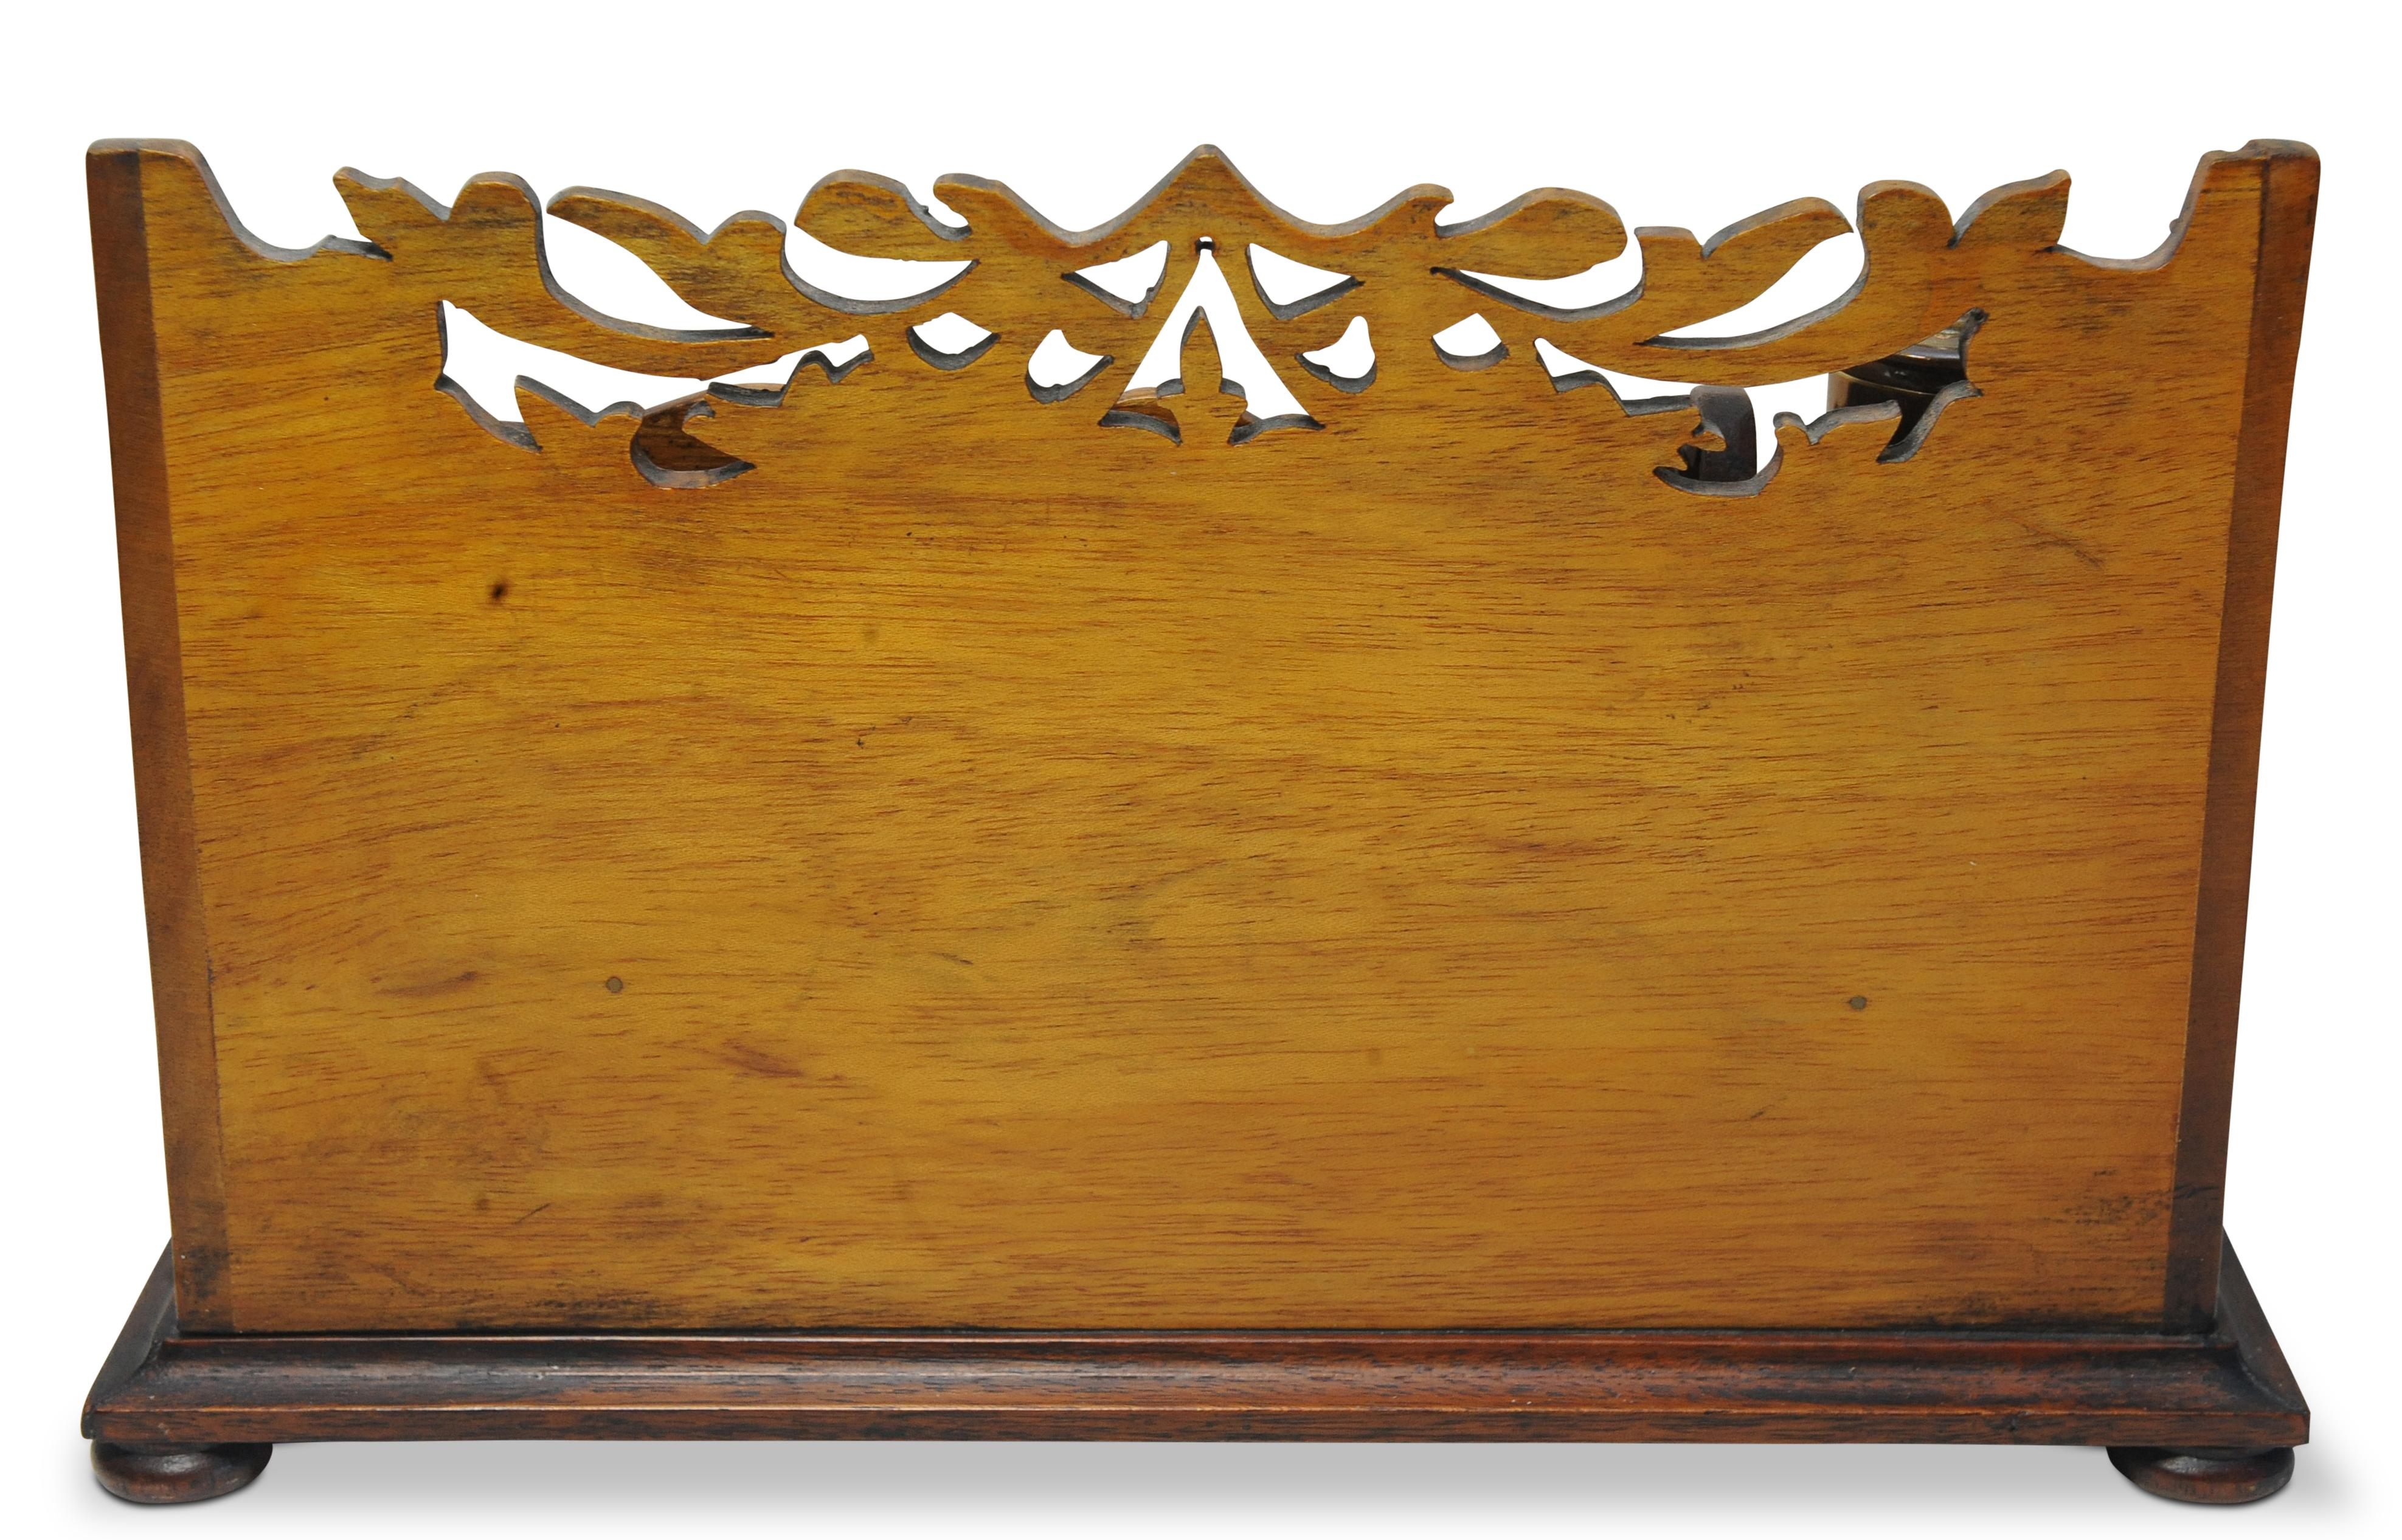  Victorian Oak Hand Crafted Letter Rack With Intricately Cut Art Nouveau Motifs  For Sale 1